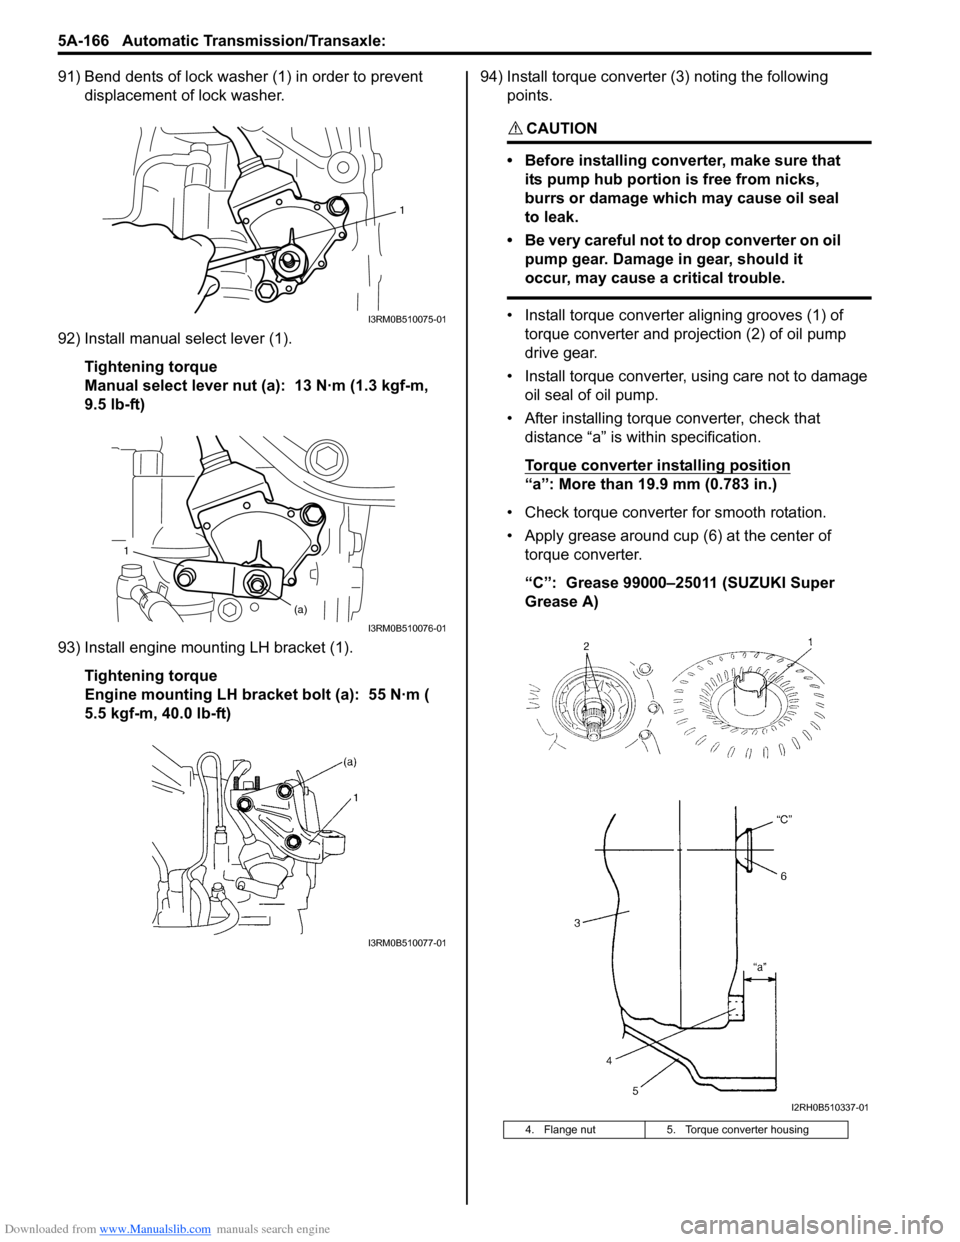 SUZUKI SWIFT 2008 2.G Service Workshop Manual Downloaded from www.Manualslib.com manuals search engine 5A-166 Automatic Transmission/Transaxle: 
91) Bend dents of lock washer (1) in order to prevent displacement of lock washer.
92) Install manual